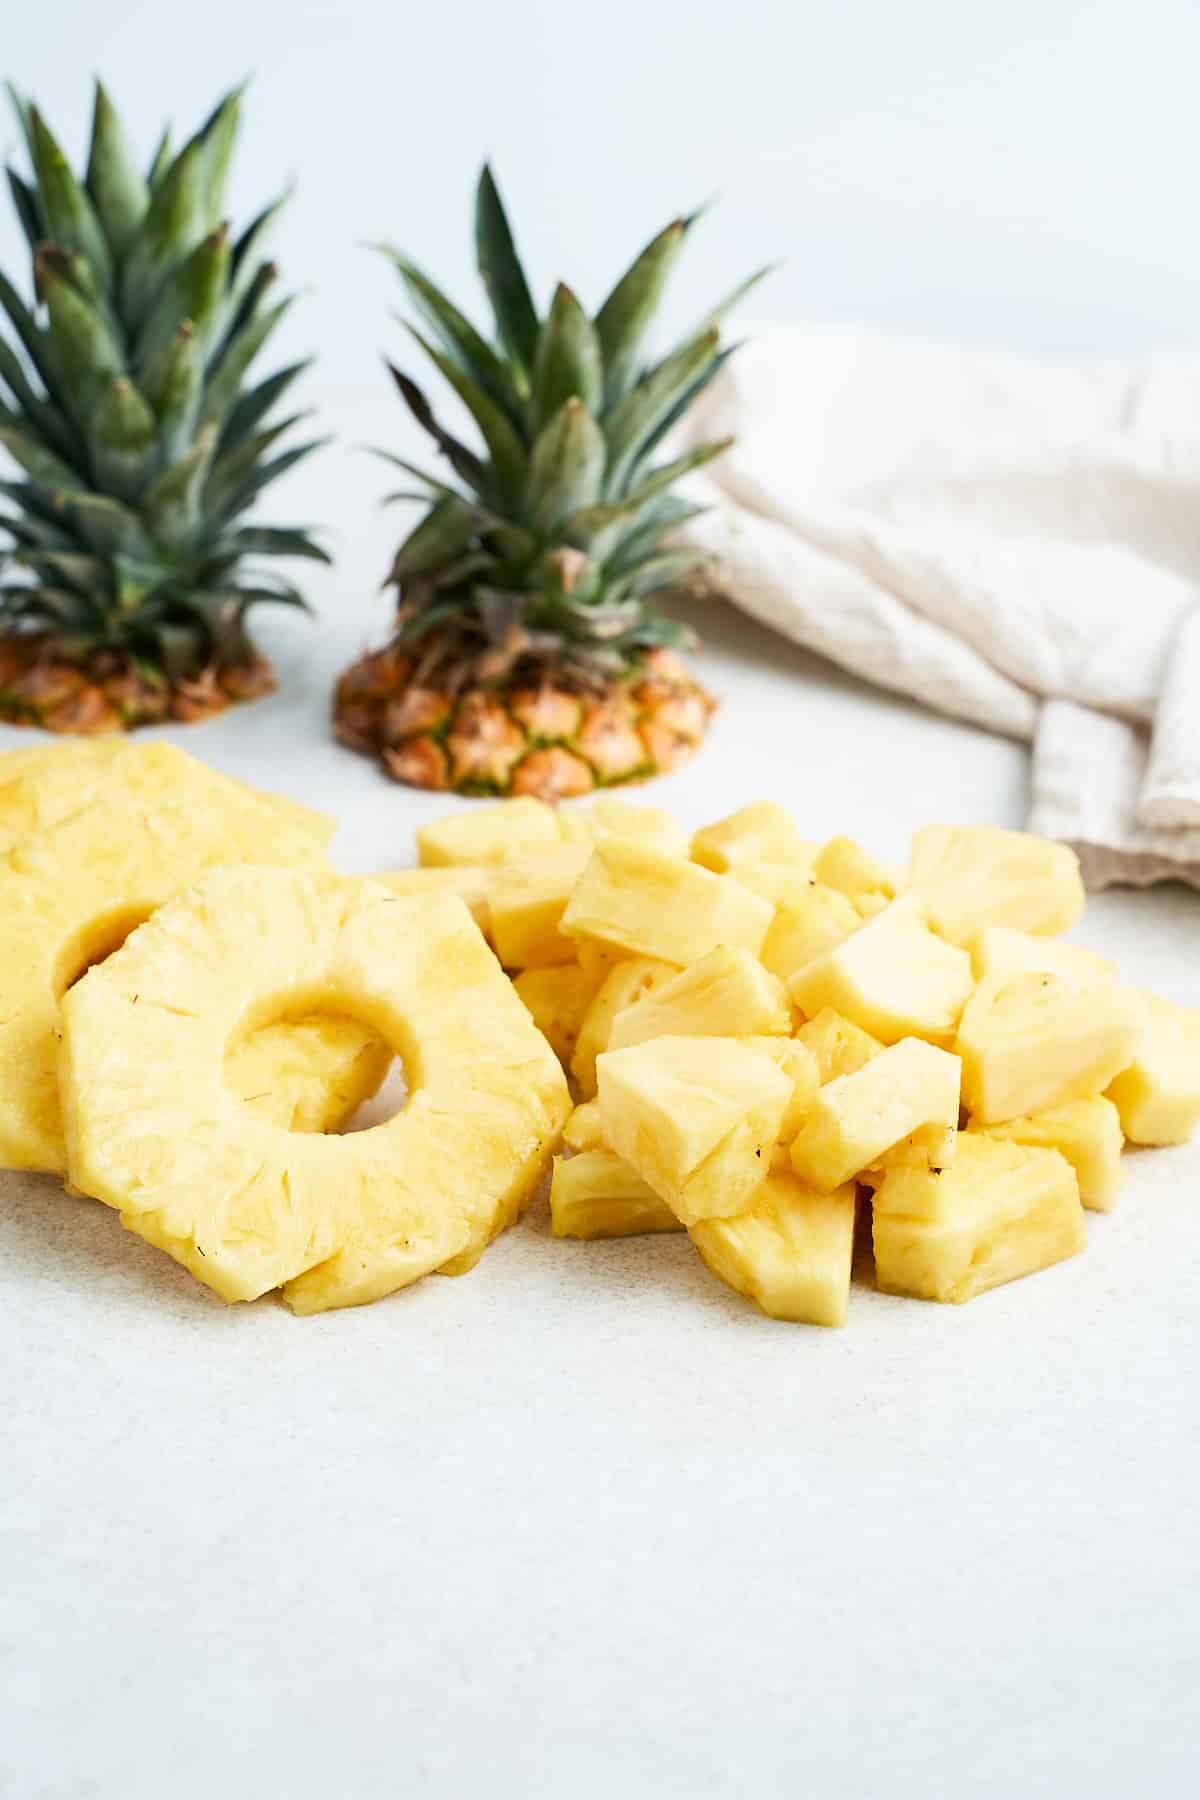 Pineapple rings and cubes.